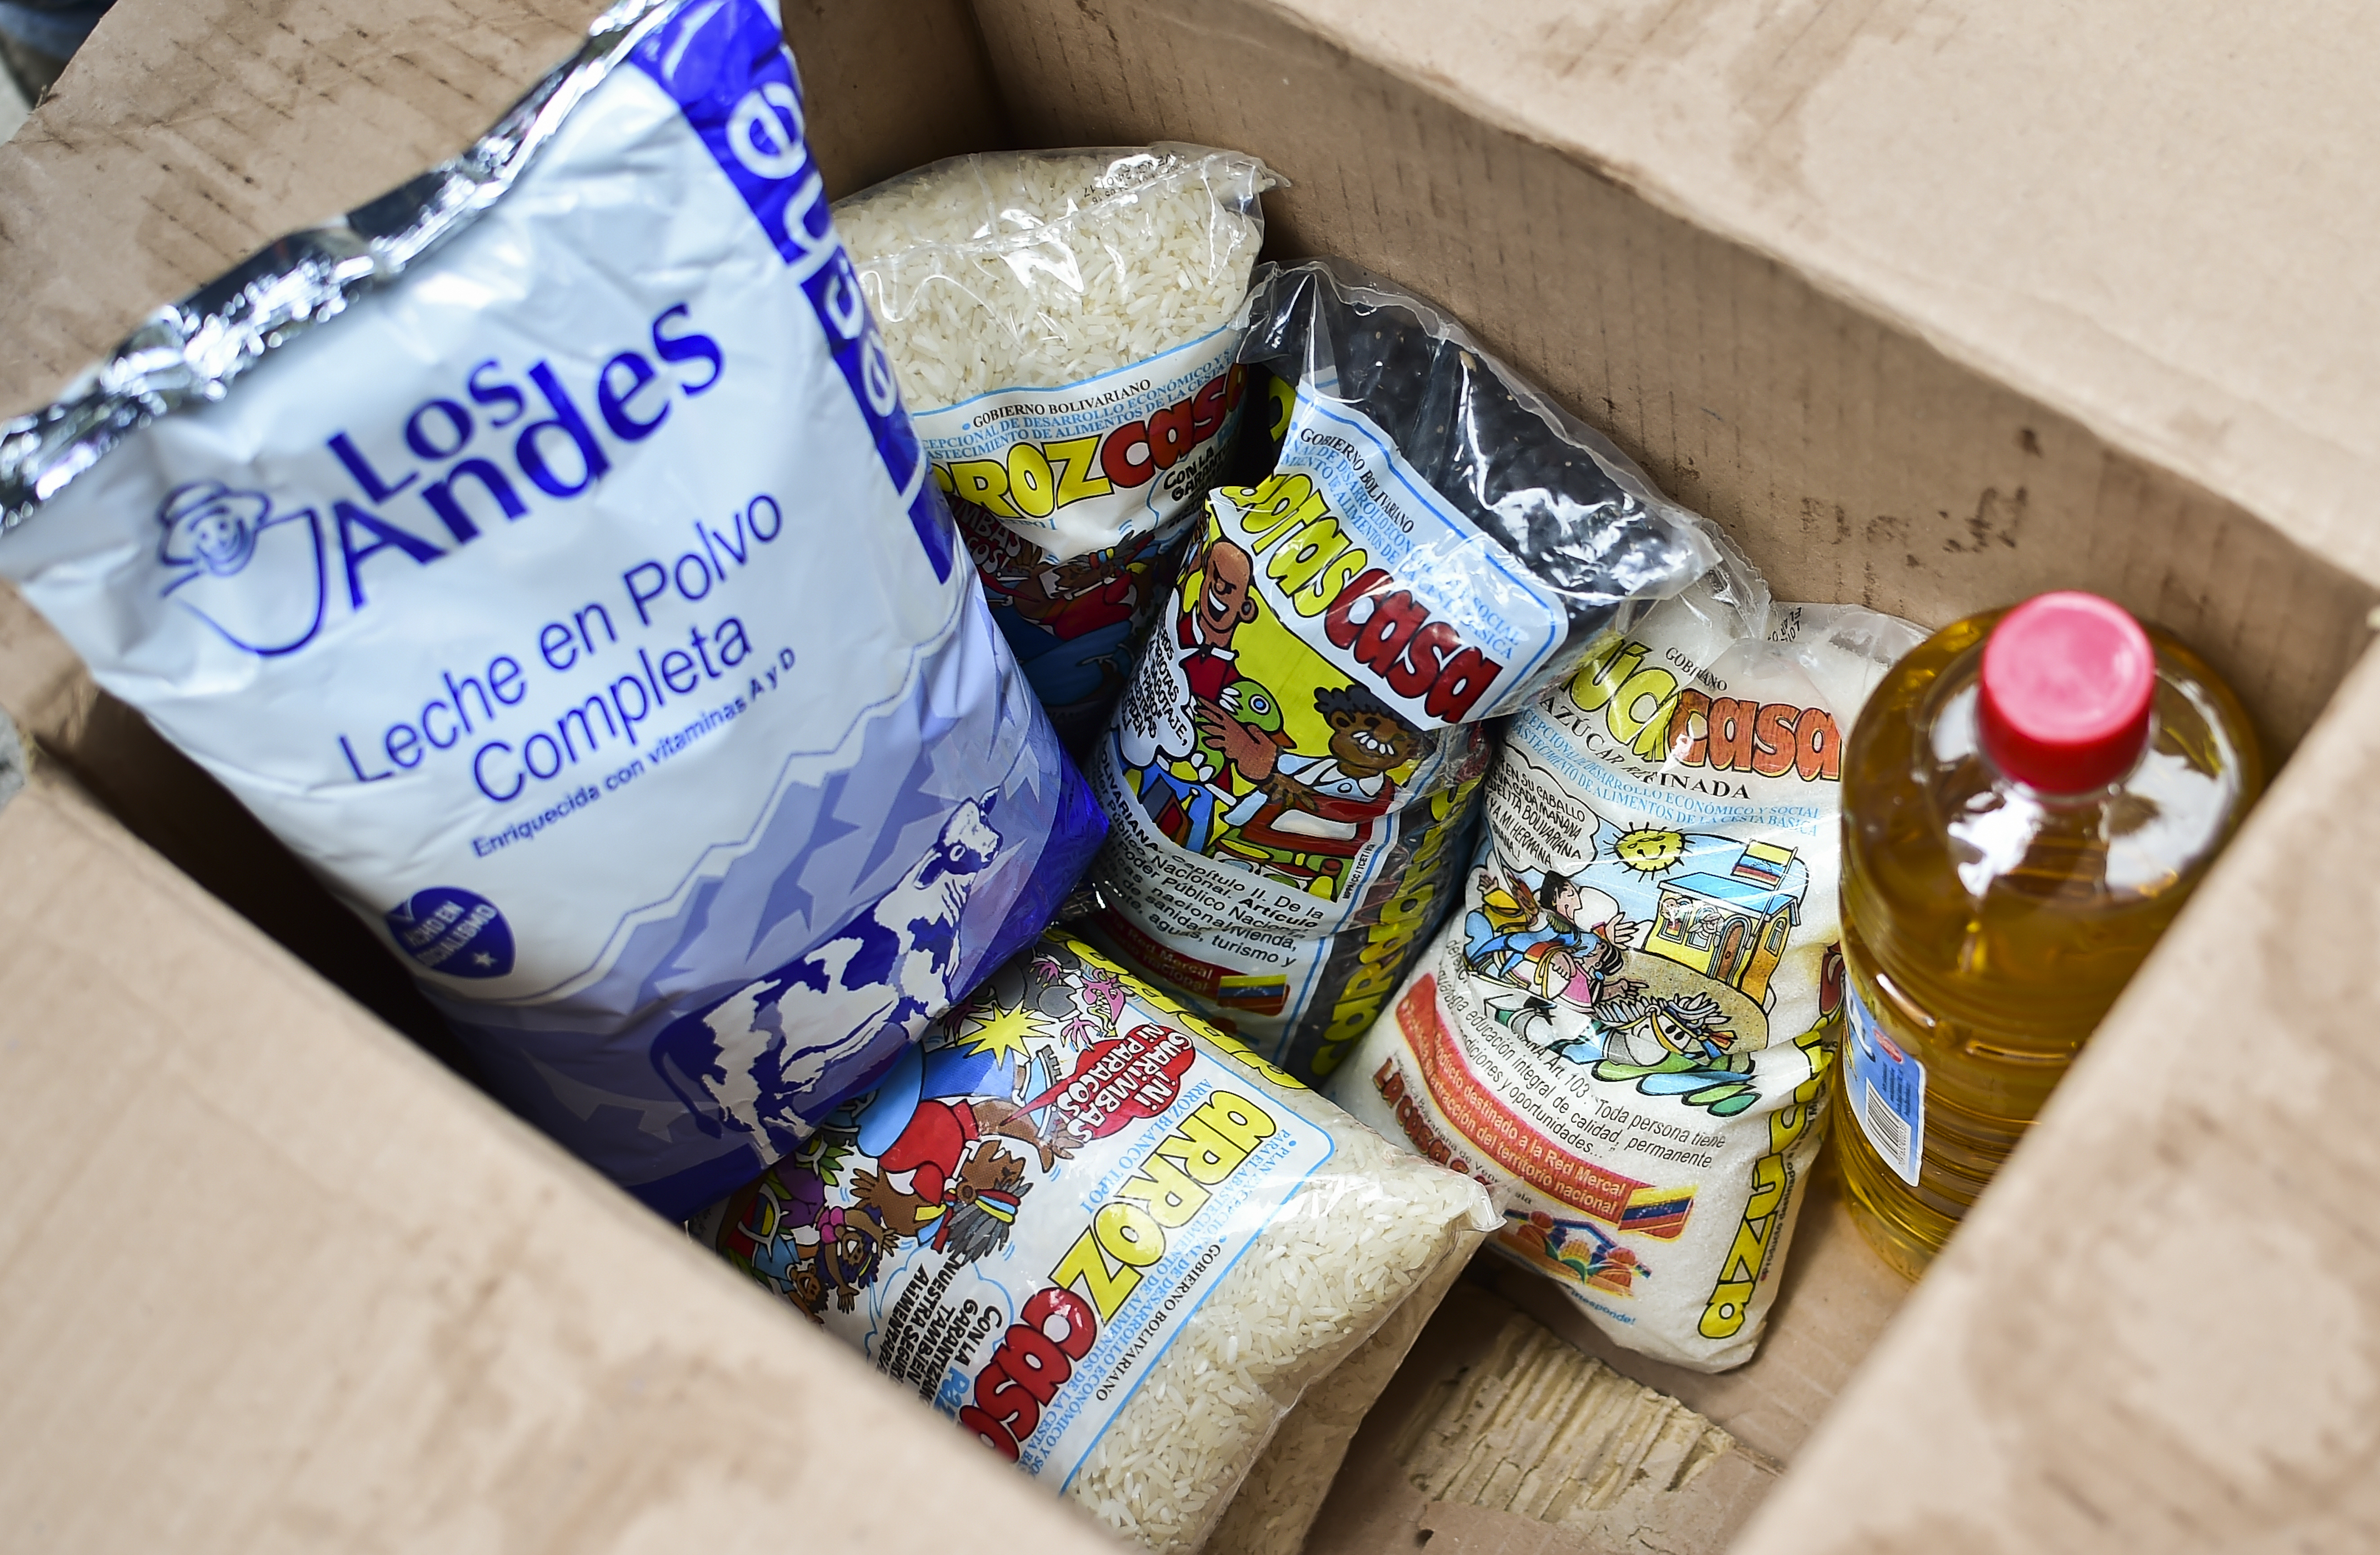 A box with basic foodstuffs is pictured in one of the food distribution centers called CLAP (Local Committees for Supply and Production), which are headed by community leaders, in the poor neighbourhood of 23 de Enero, in Caracas, on June 4, 2016.  Shortages of basic goods have fueled looting, violent crime and vigilante justice. At least 94 looting sprees broke out in the first four months of the year, according to the Venezuelan Observatory for Social Conflict. Venezuela, home to the world's largest oil reserves, has been hit hard by the collapse in global crude prices over the past two years. The economy is forecast to contract eight percent this year, with inflation of 700 percent. / AFP PHOTO / RONALDO SCHEMIDT